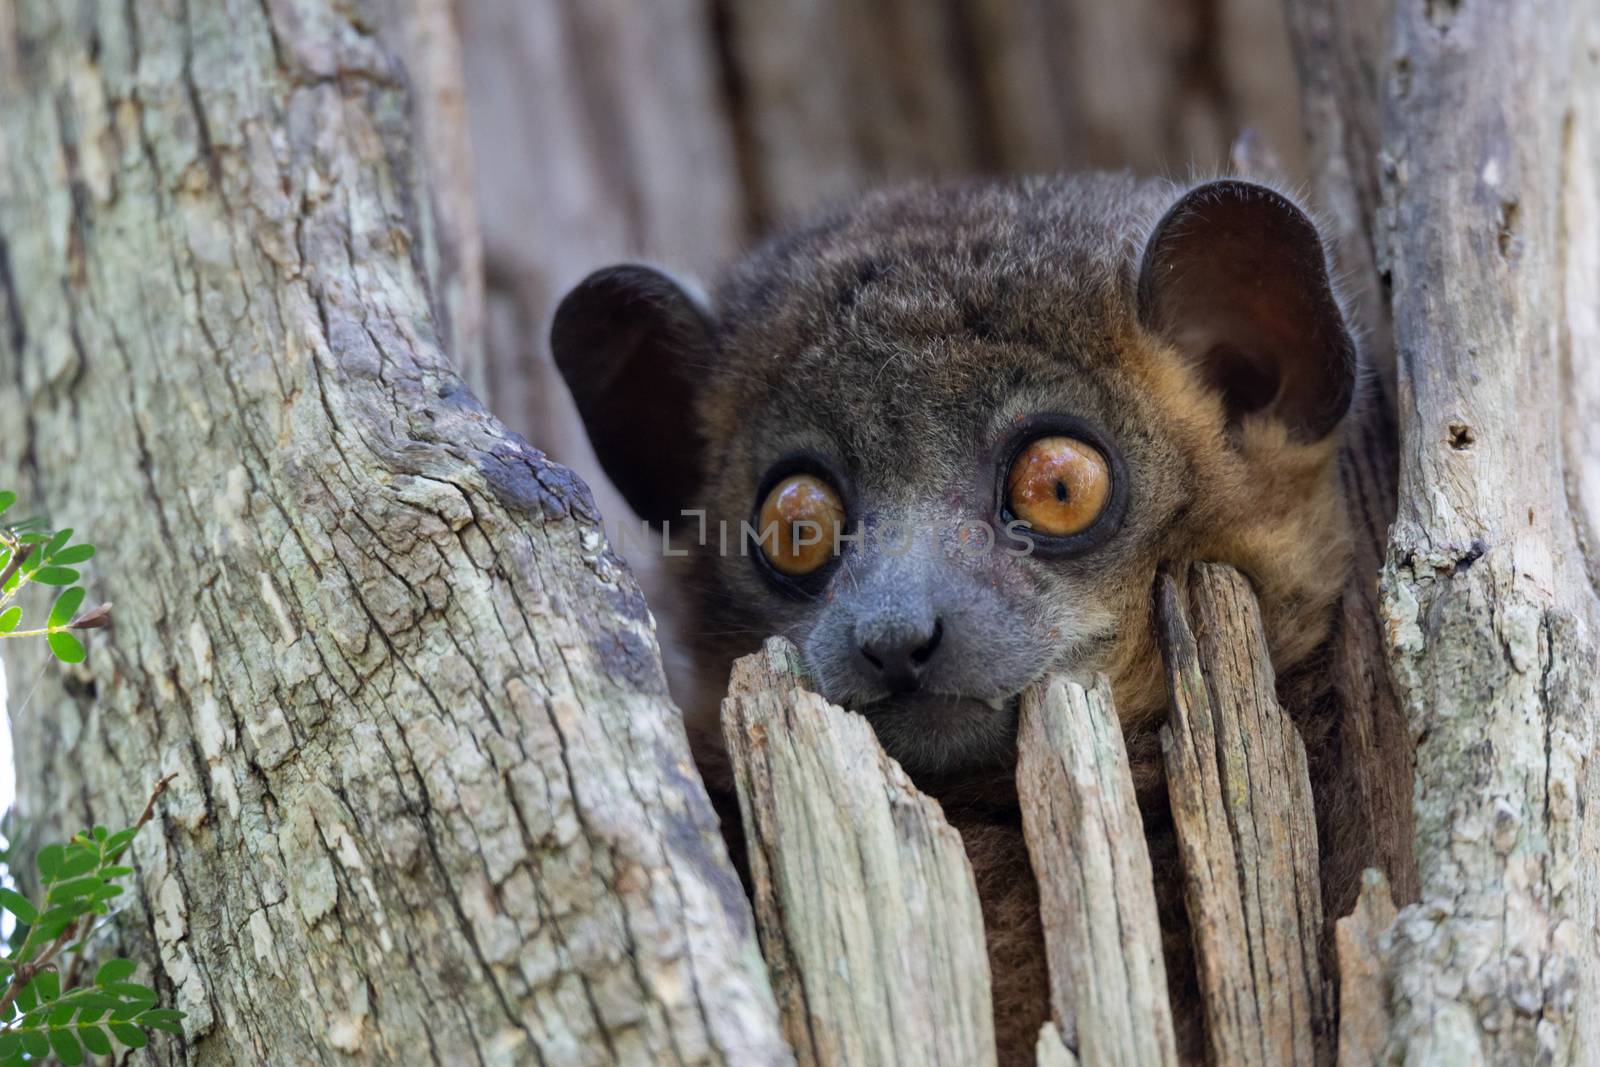 A weasel lemur in a tree hollow looks out curiously by 25ehaag6